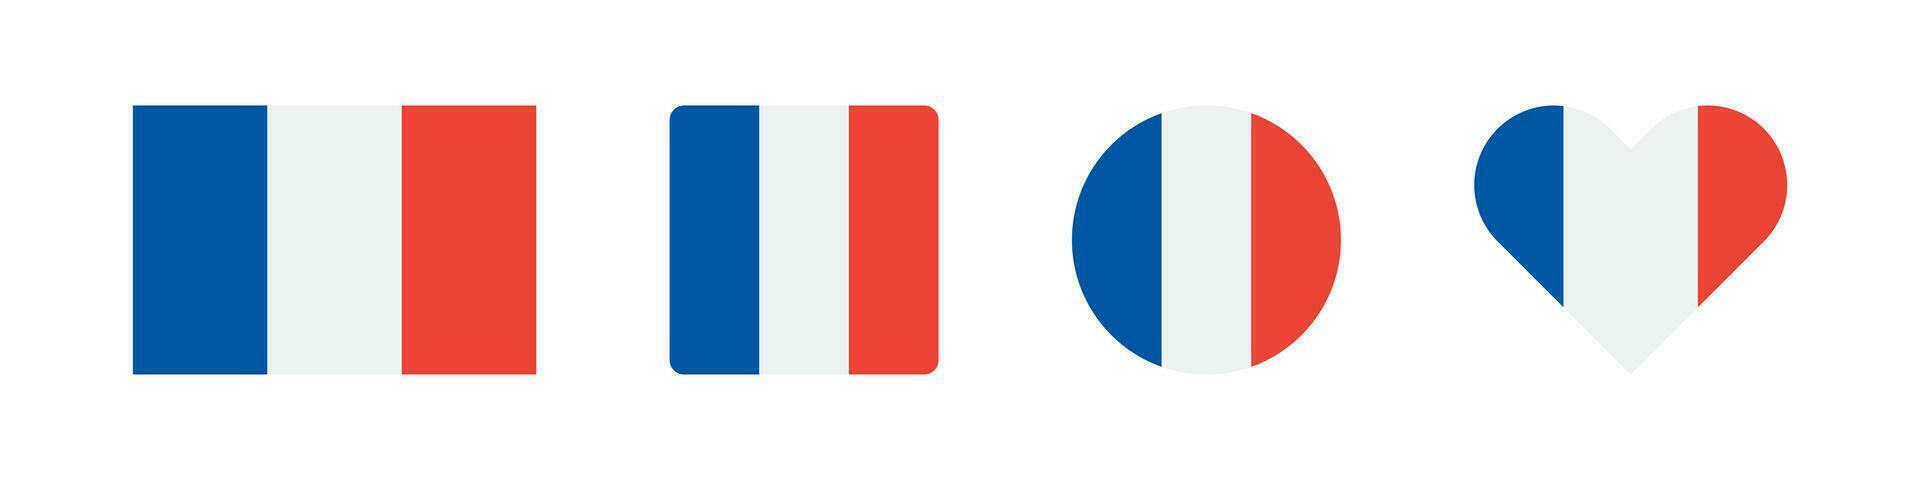 France flag icon. French banner signs. National symbol. Paris symbols. Circle badge of Europe country icons. Flat color. Vector sign.